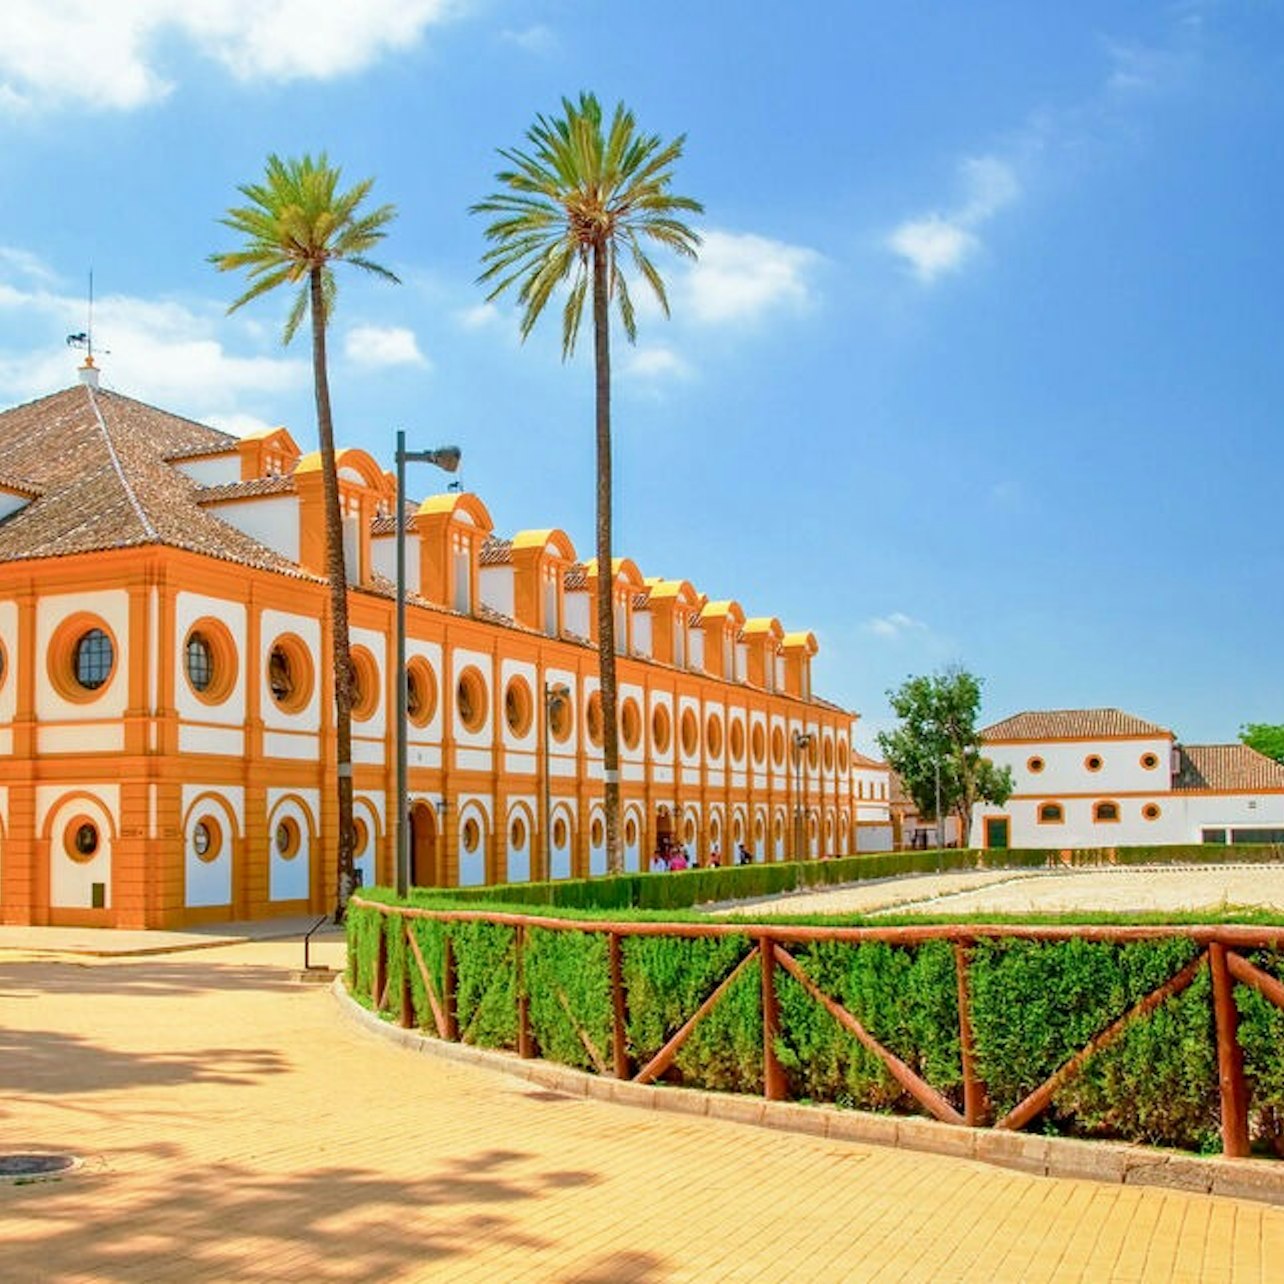 Royal Andalusian School of Equestrian Art: Andalusian Horse Show - Accommodations in Jerez de la Frontera